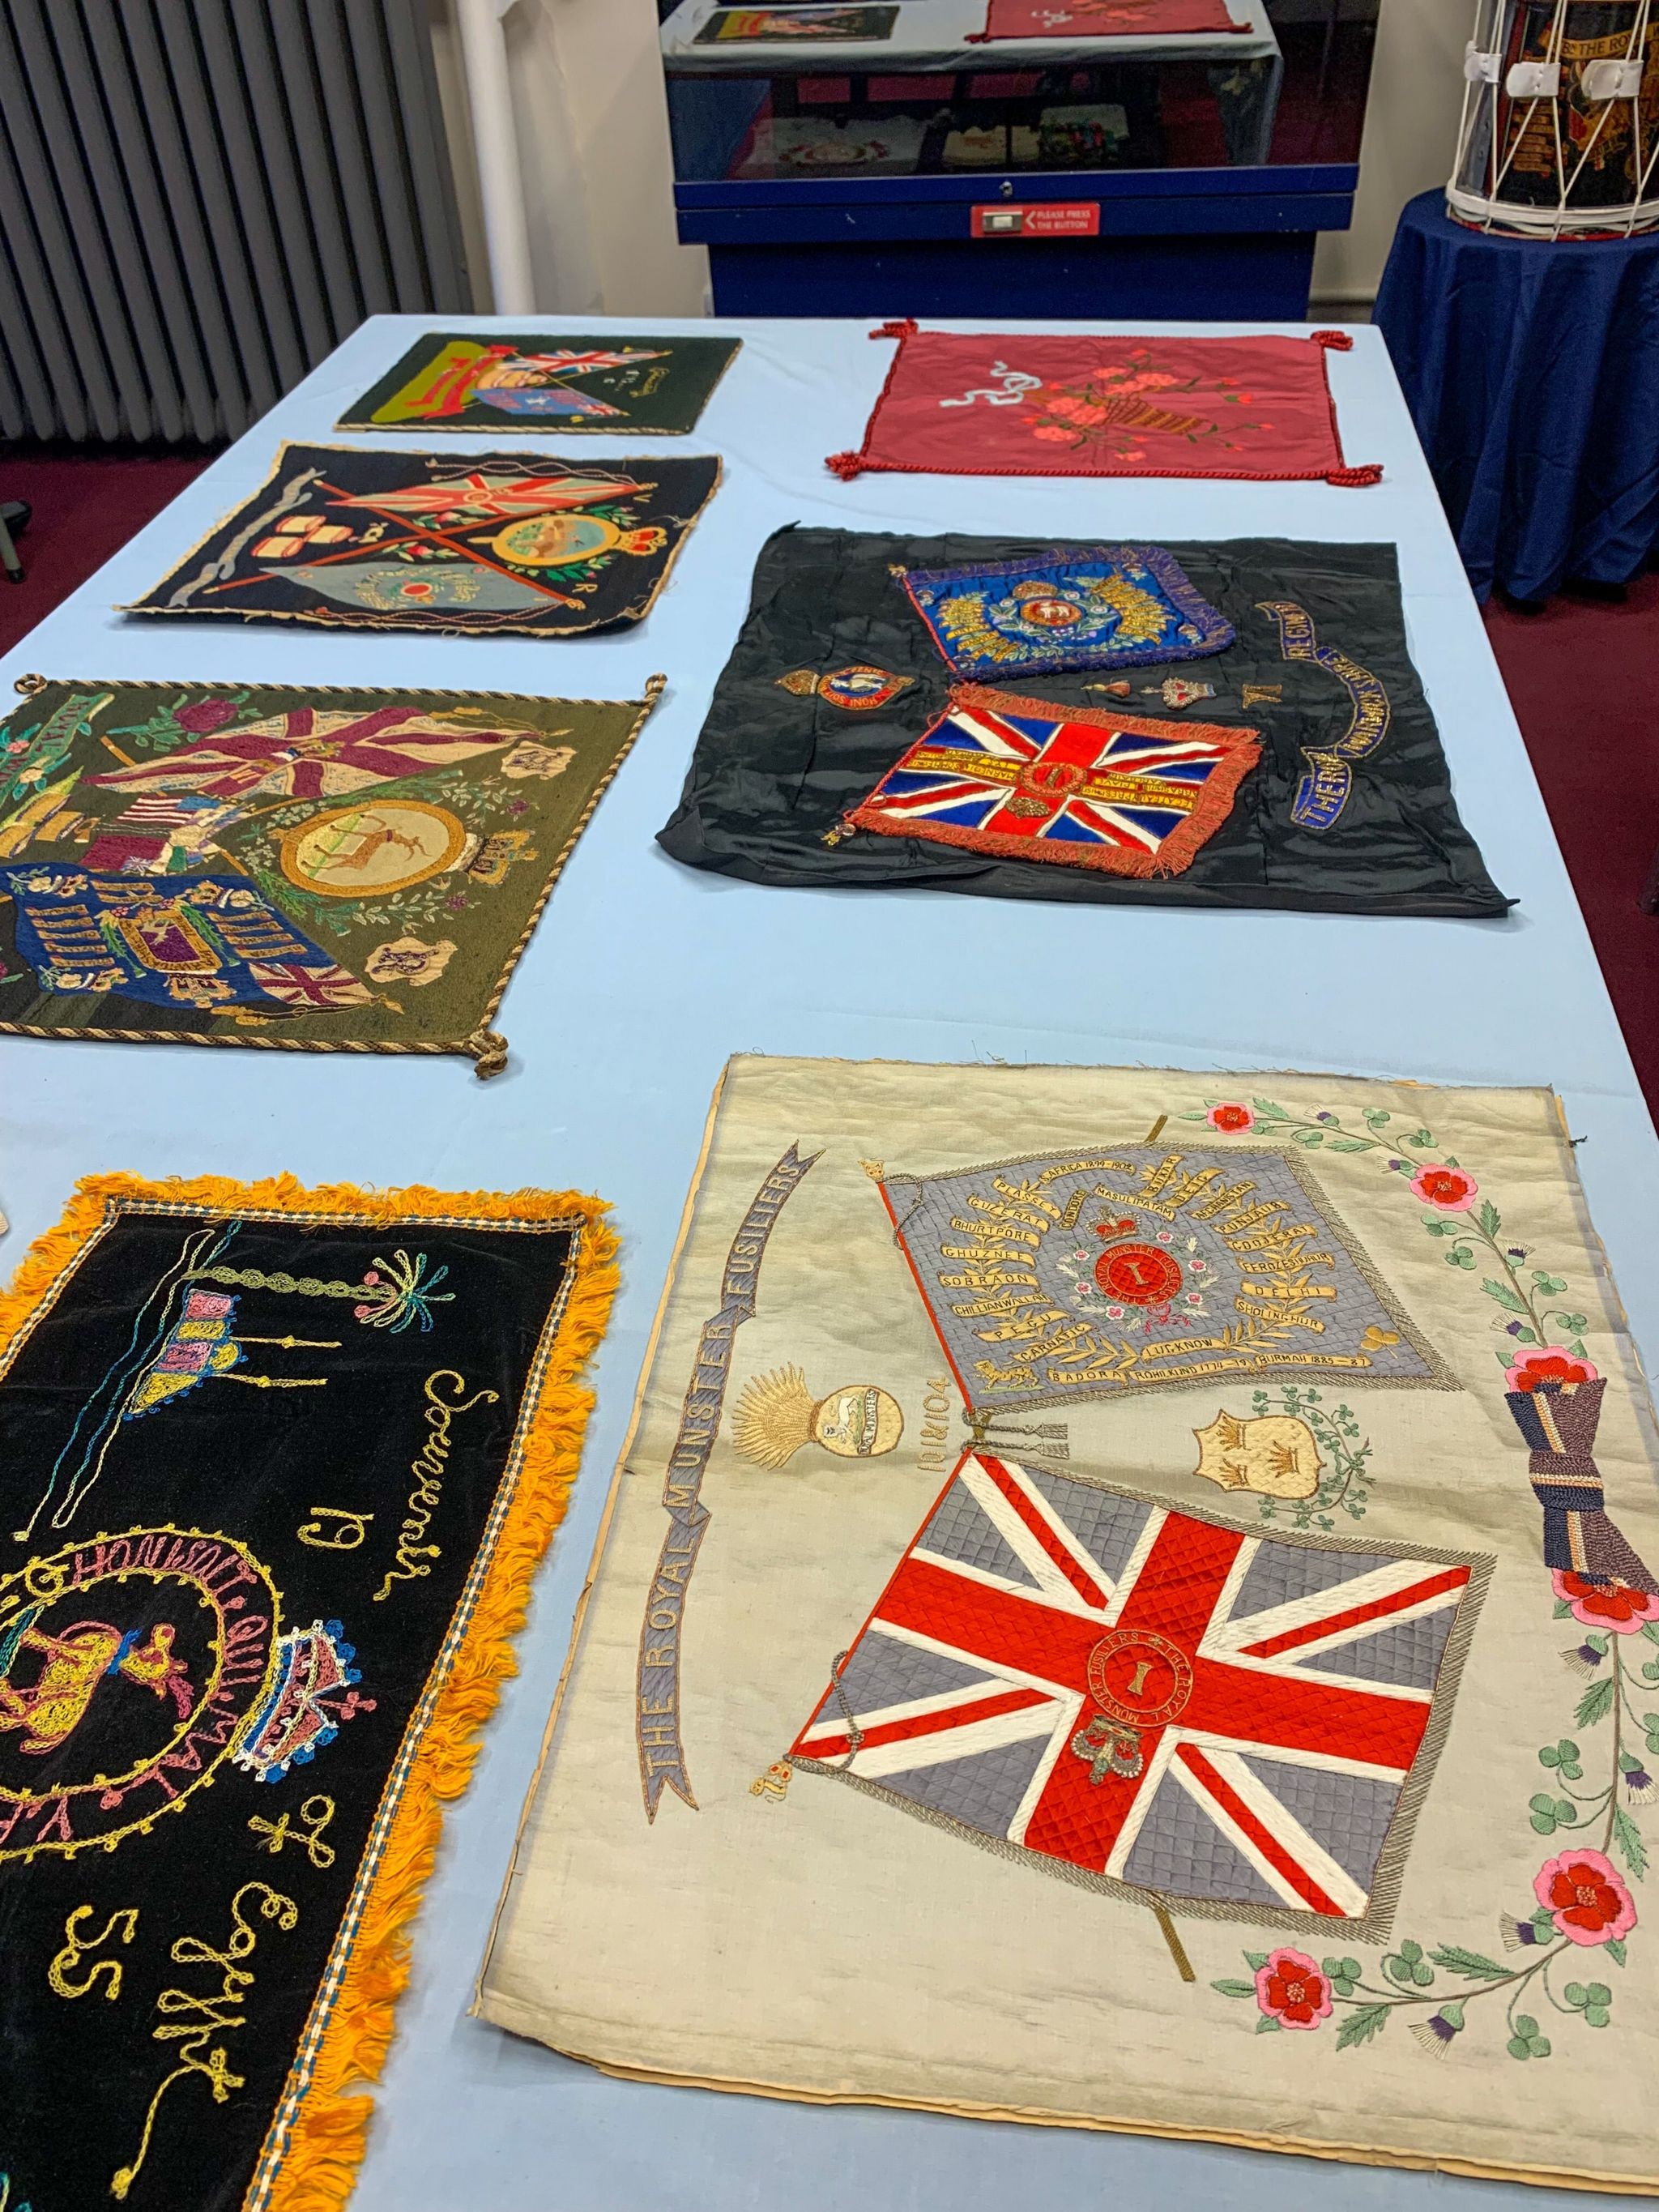 Embroidery exhibition